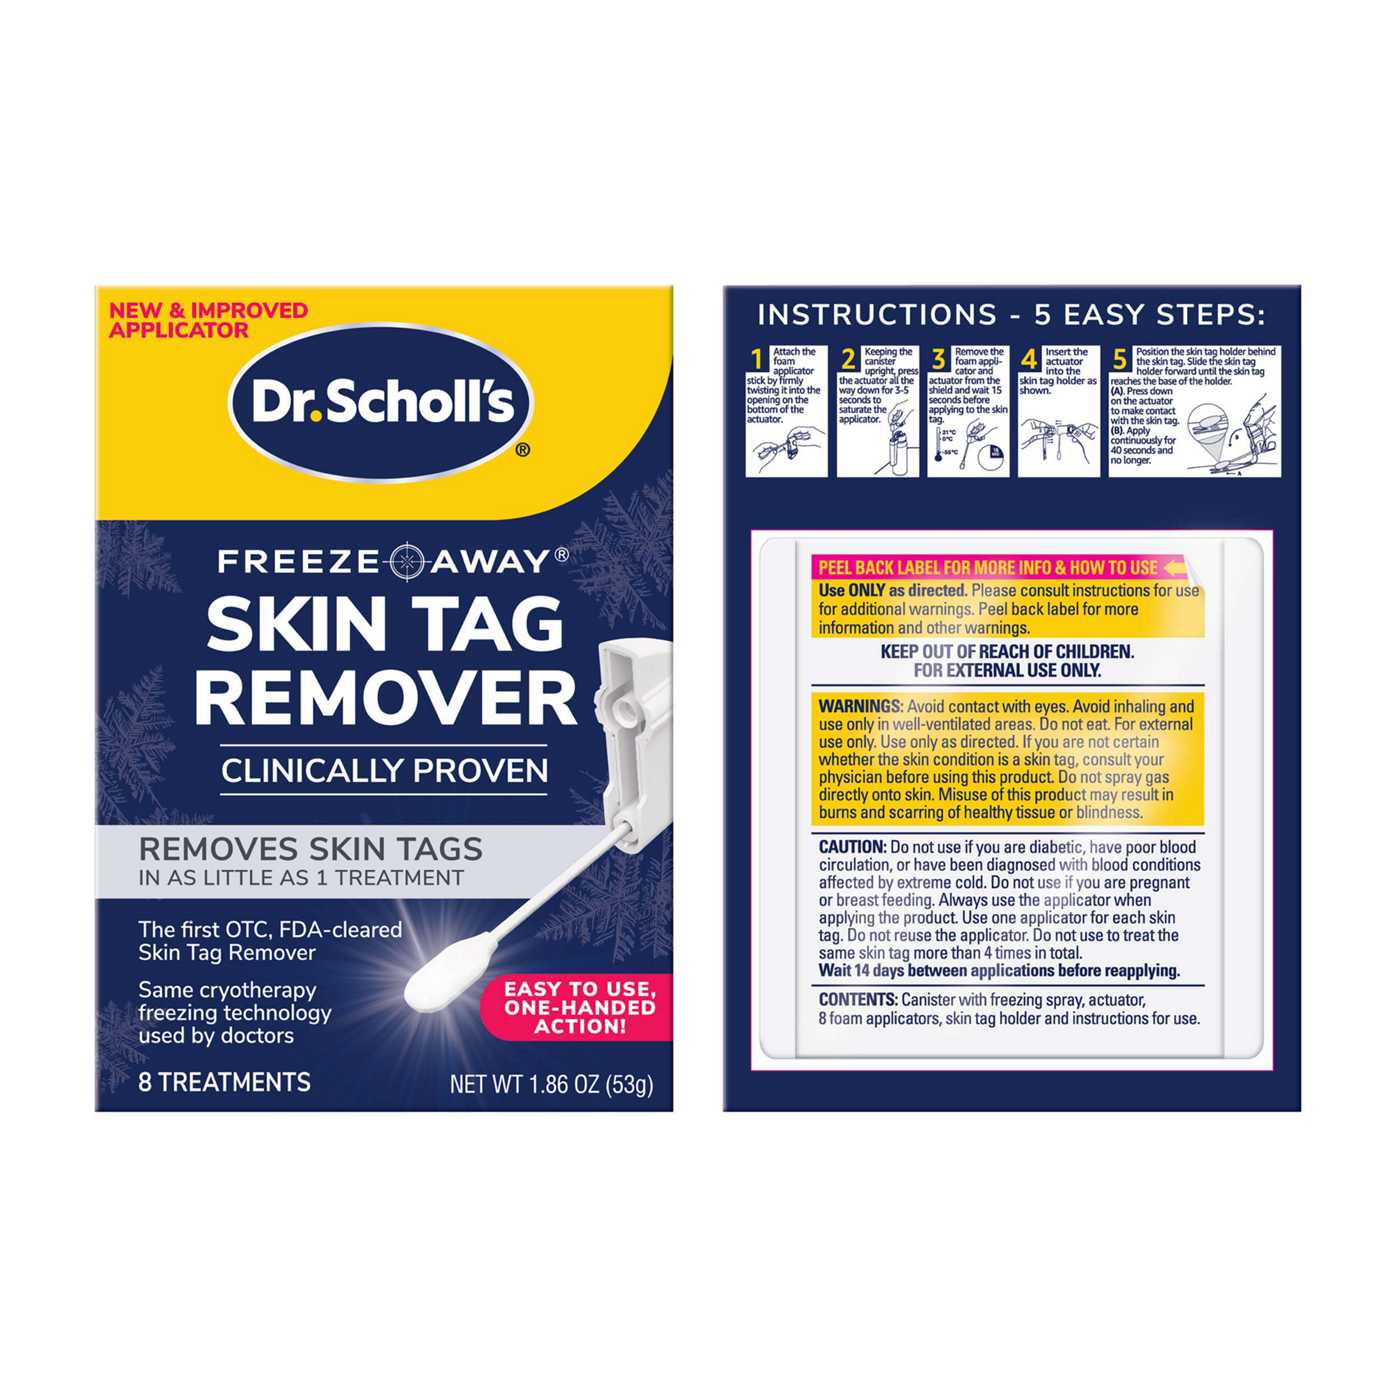 Dr. Scholl's Freeze Away Skin Tag Remover; image 6 of 6